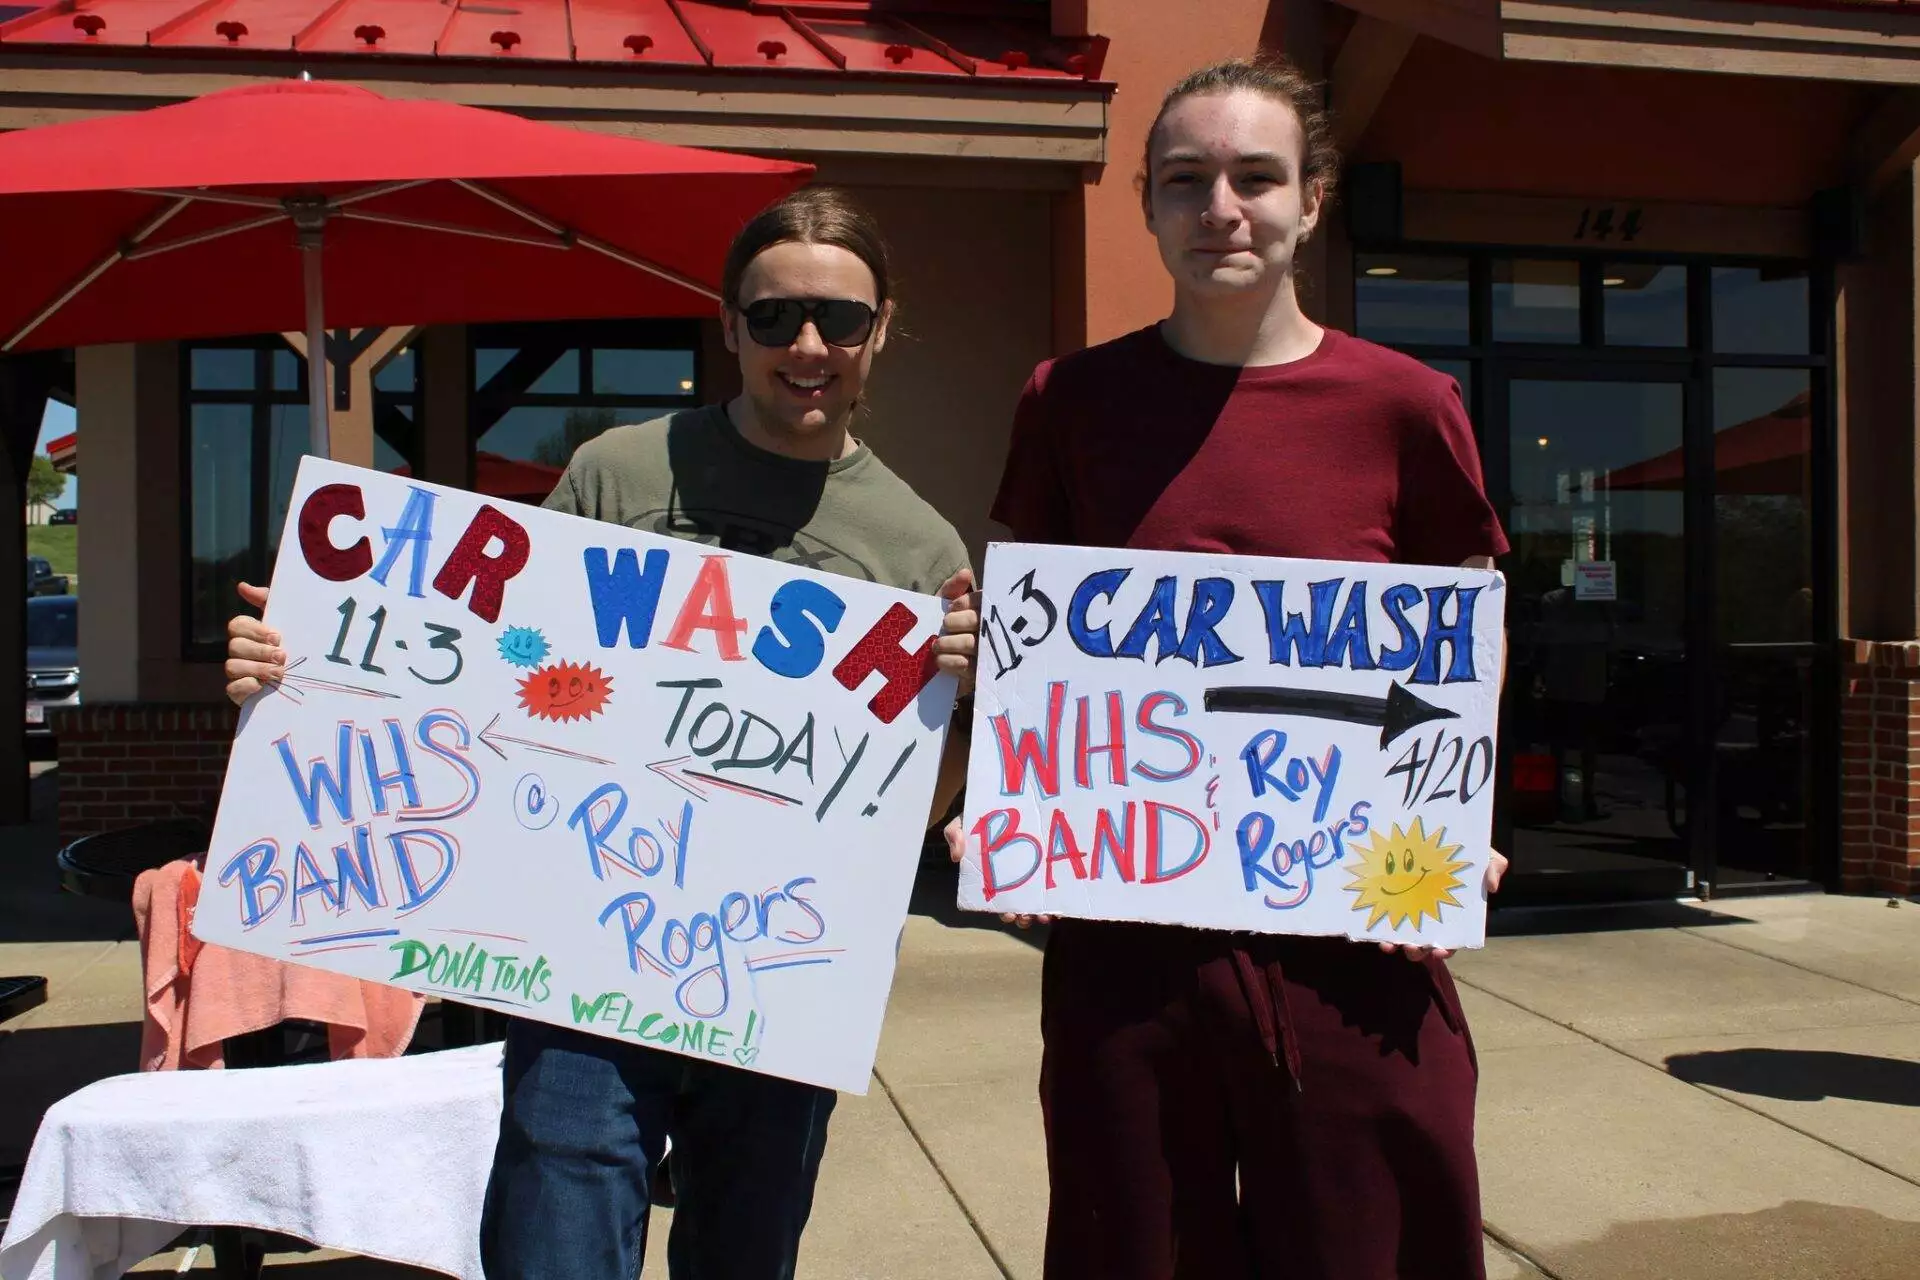 Two people holding handmade signs promoting a car wash fundraiser for a school band, standing in front of a restaurant.